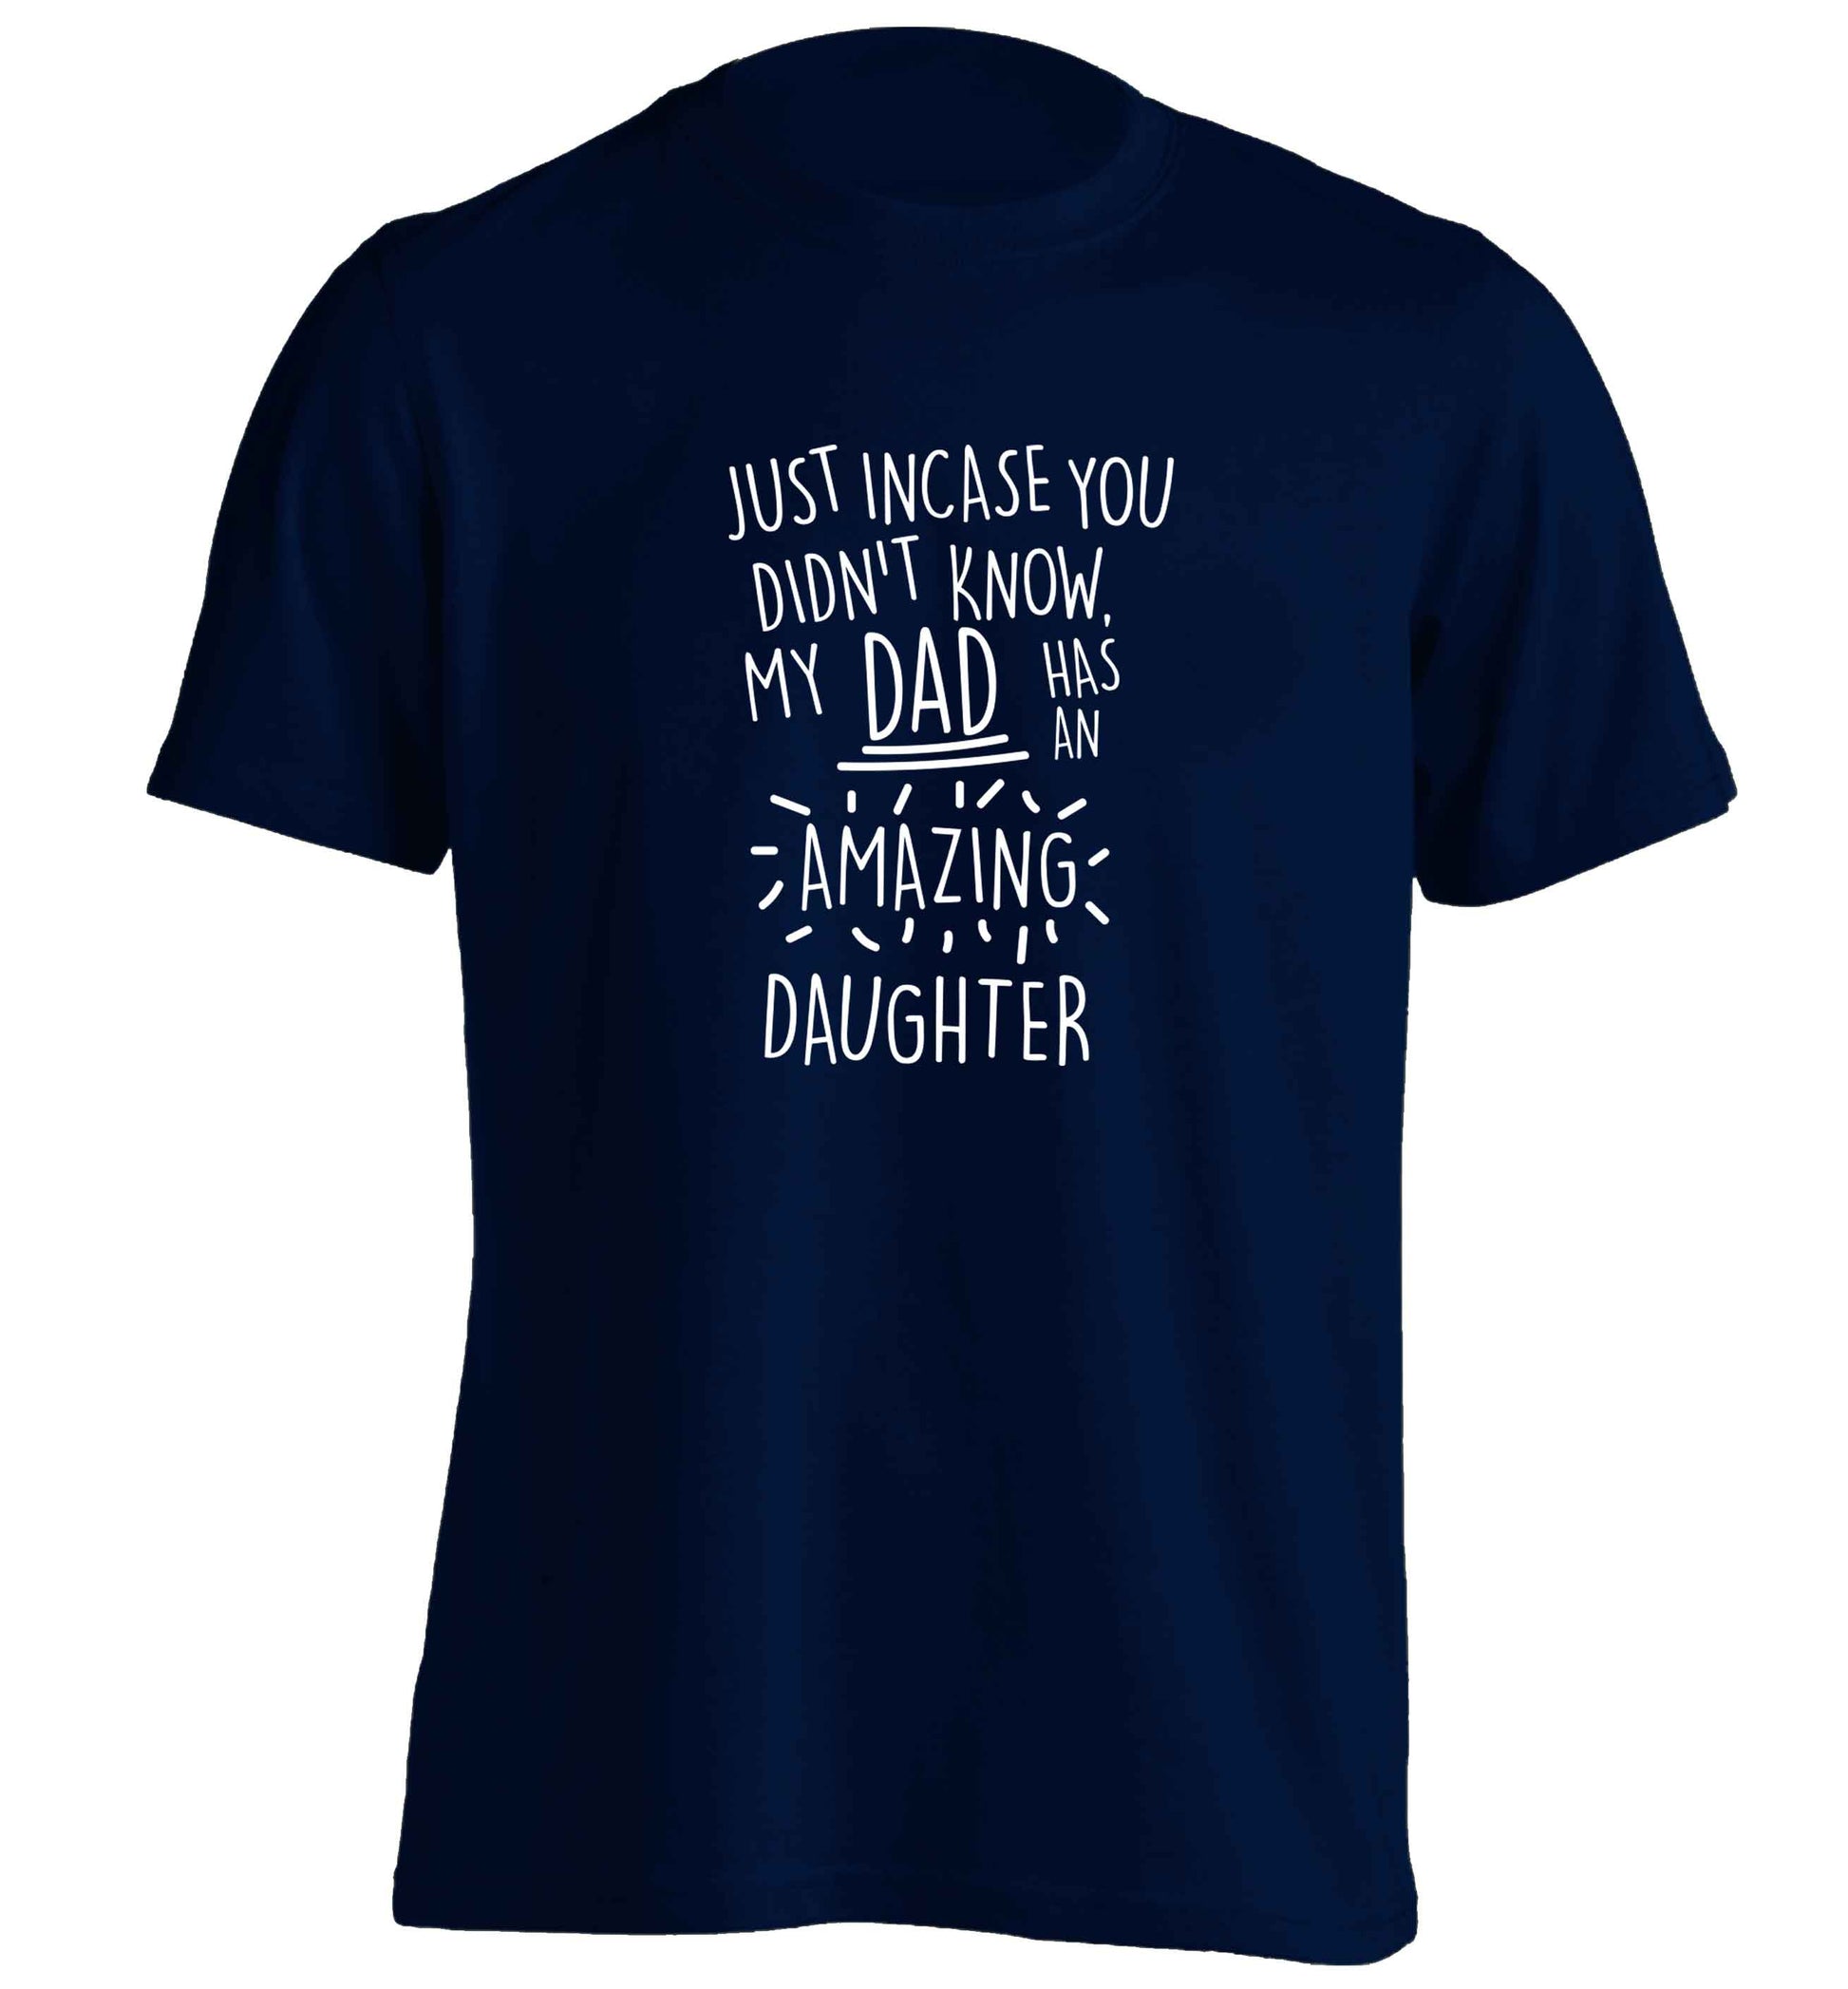 Just incase you didn't know my dad has an amazing daughter adults unisex navy Tshirt 2XL